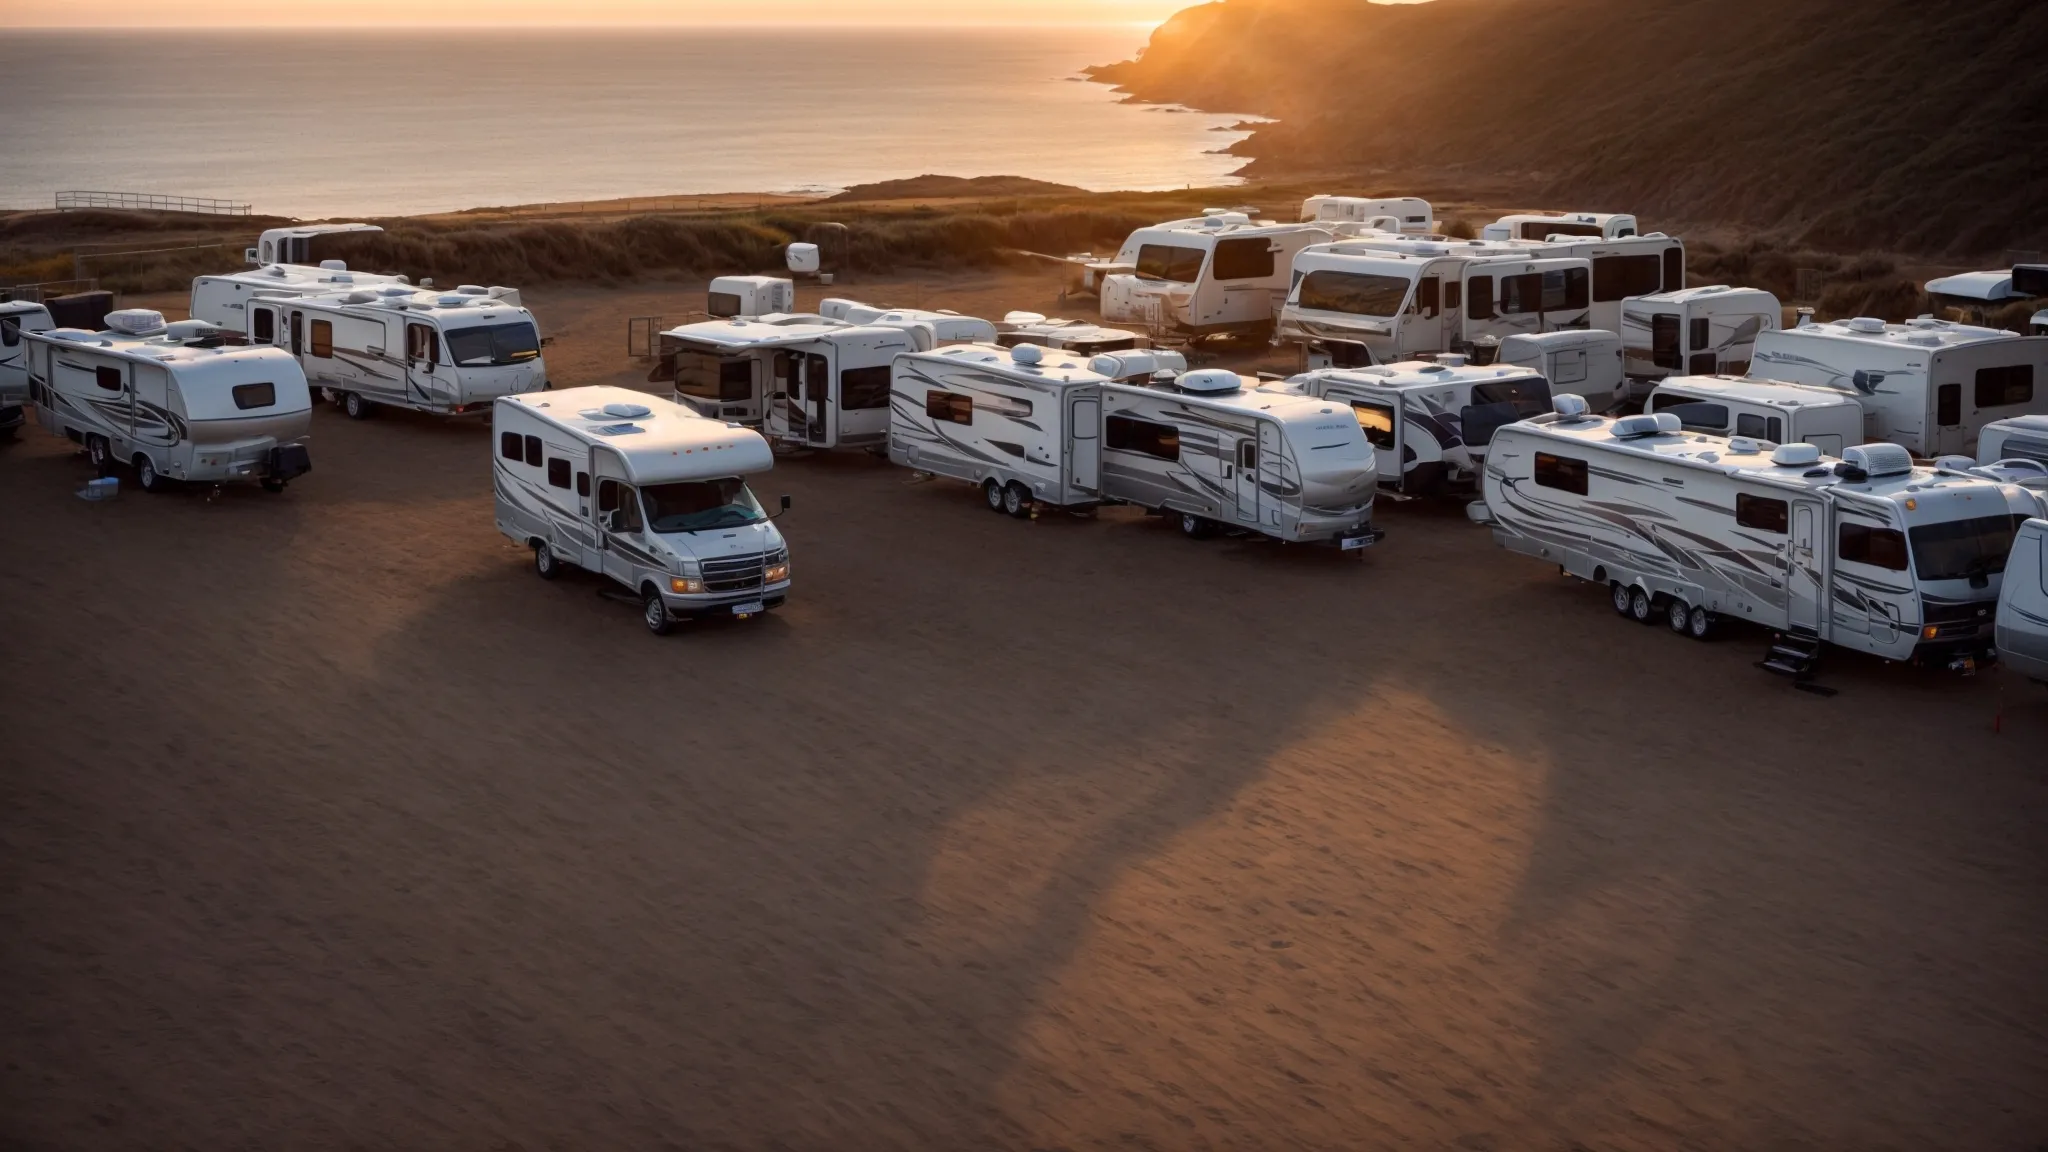 an array of rvs parked by the glistening seaside with the sun setting over the pacific ocean.